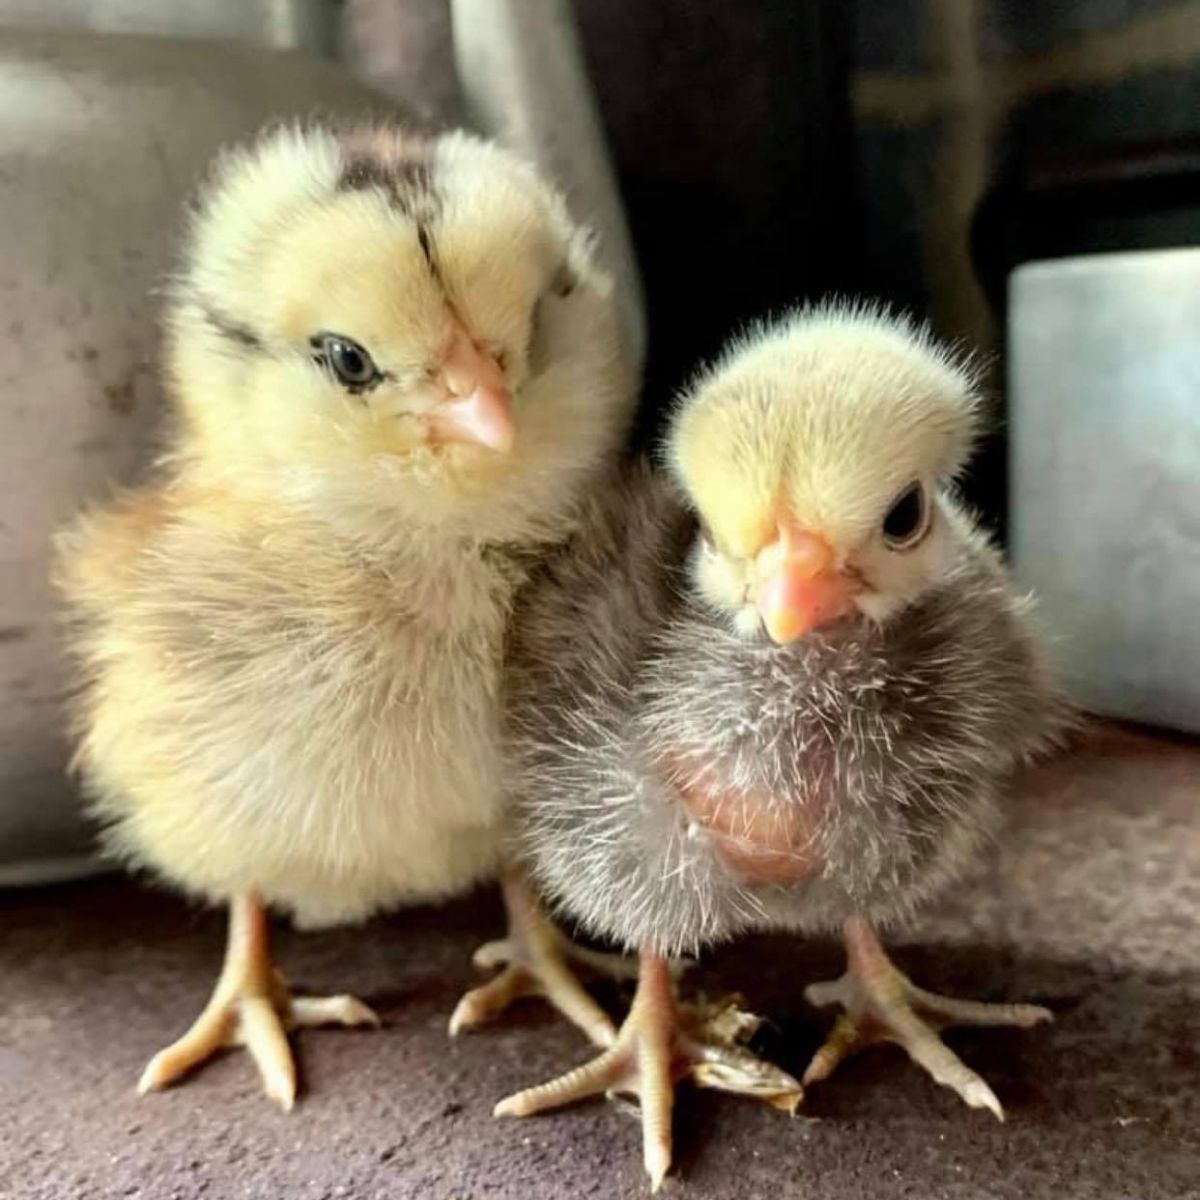 A pair of baby chicks.